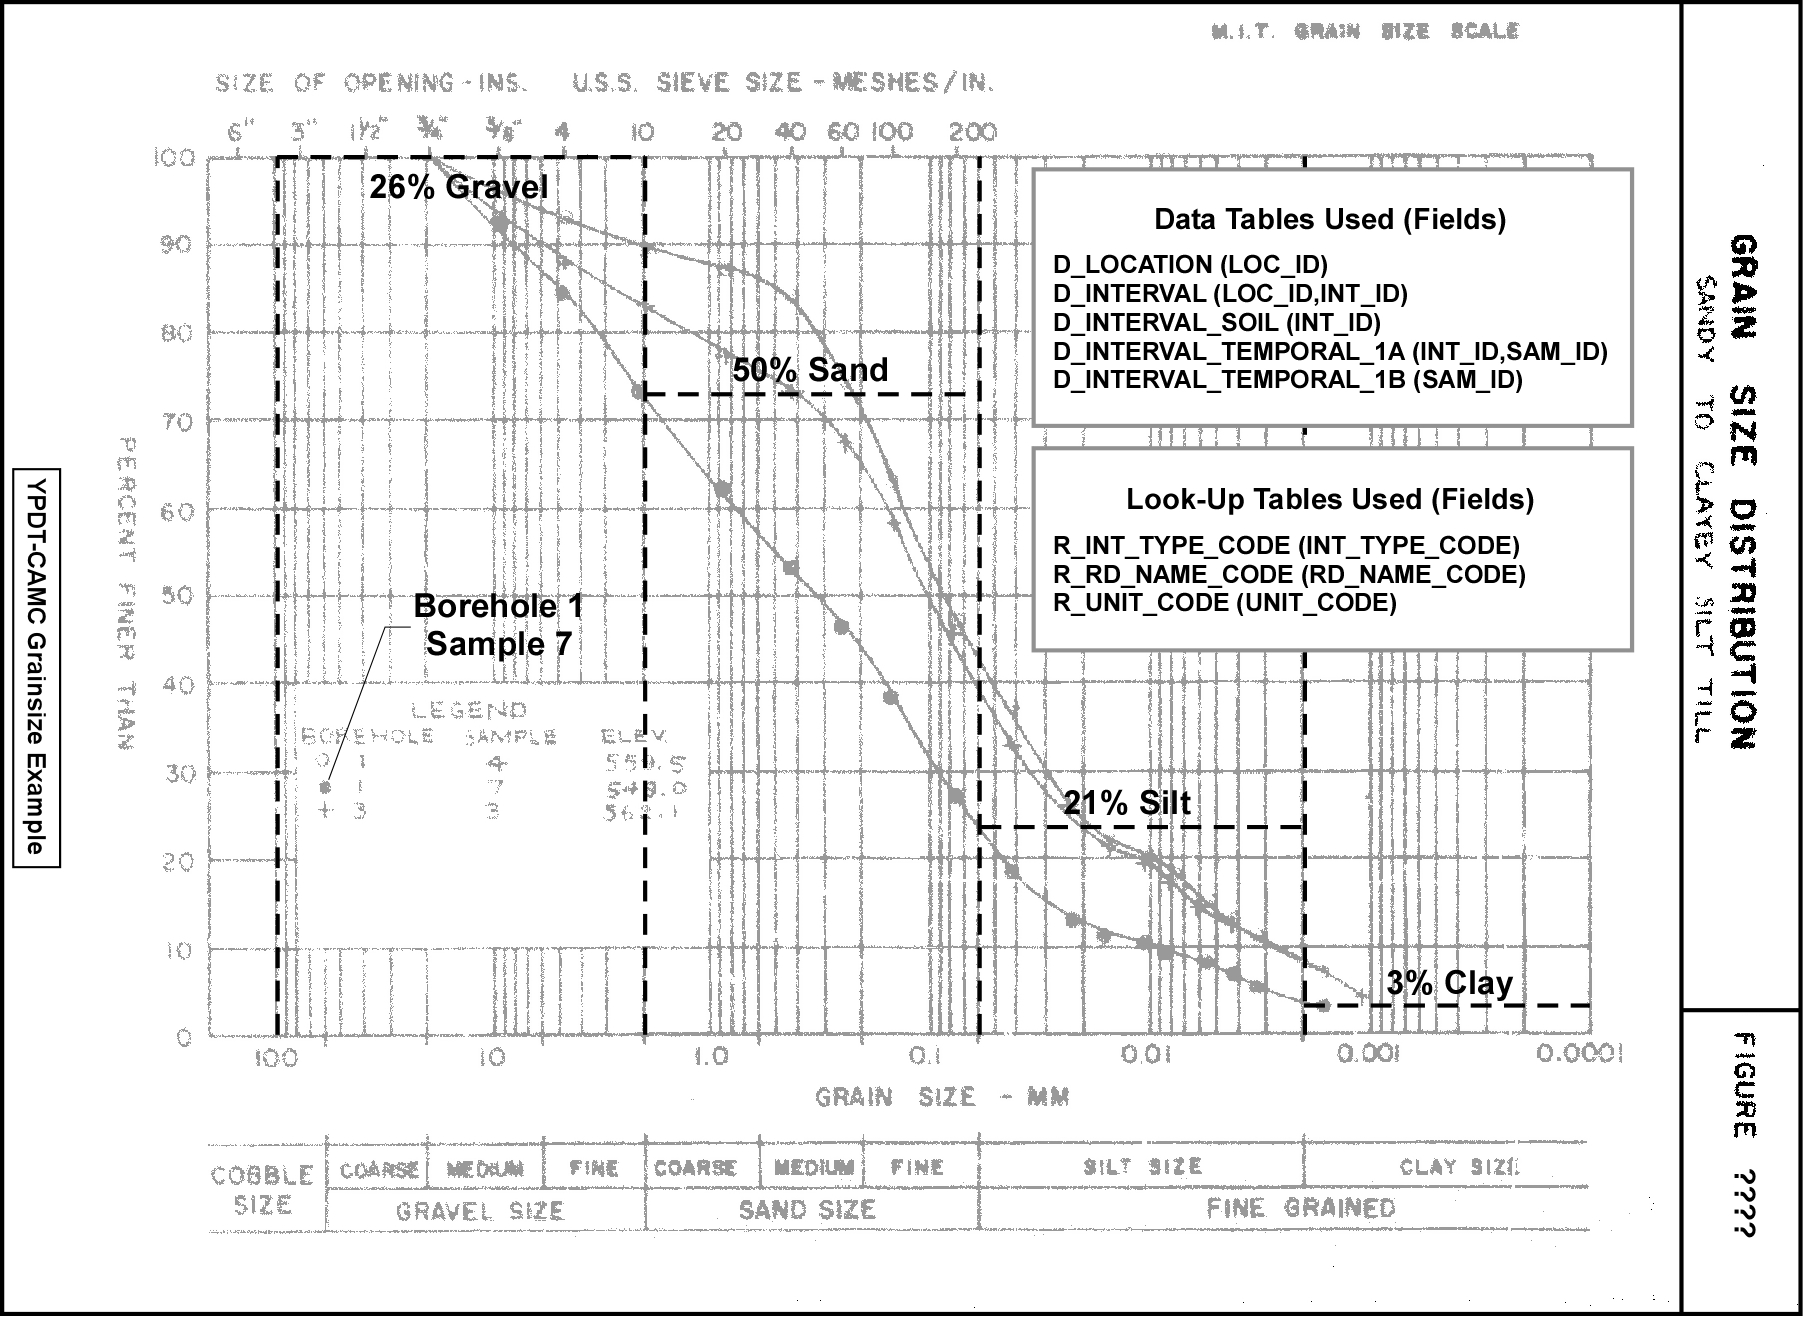 Figure 2.3.3.1 Grain Size Analysis - data and table/field listing